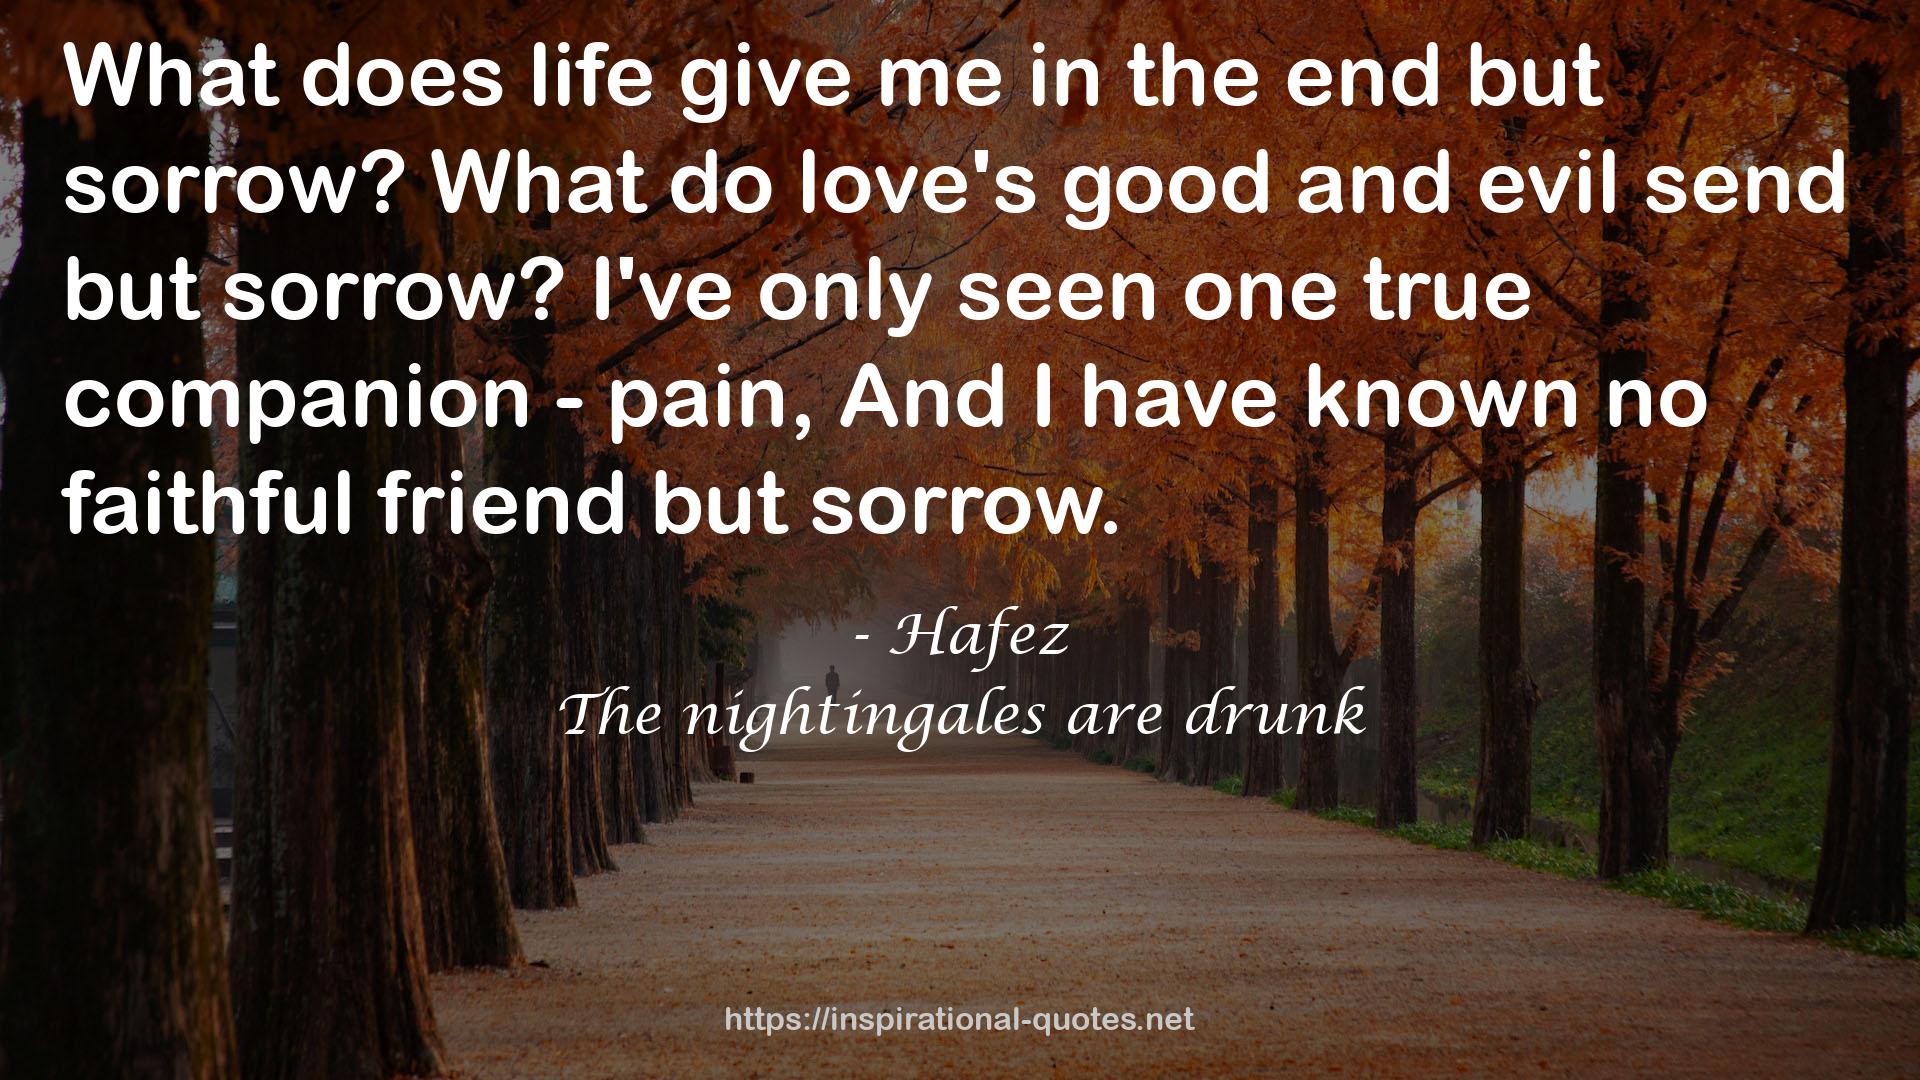 The nightingales are drunk QUOTES